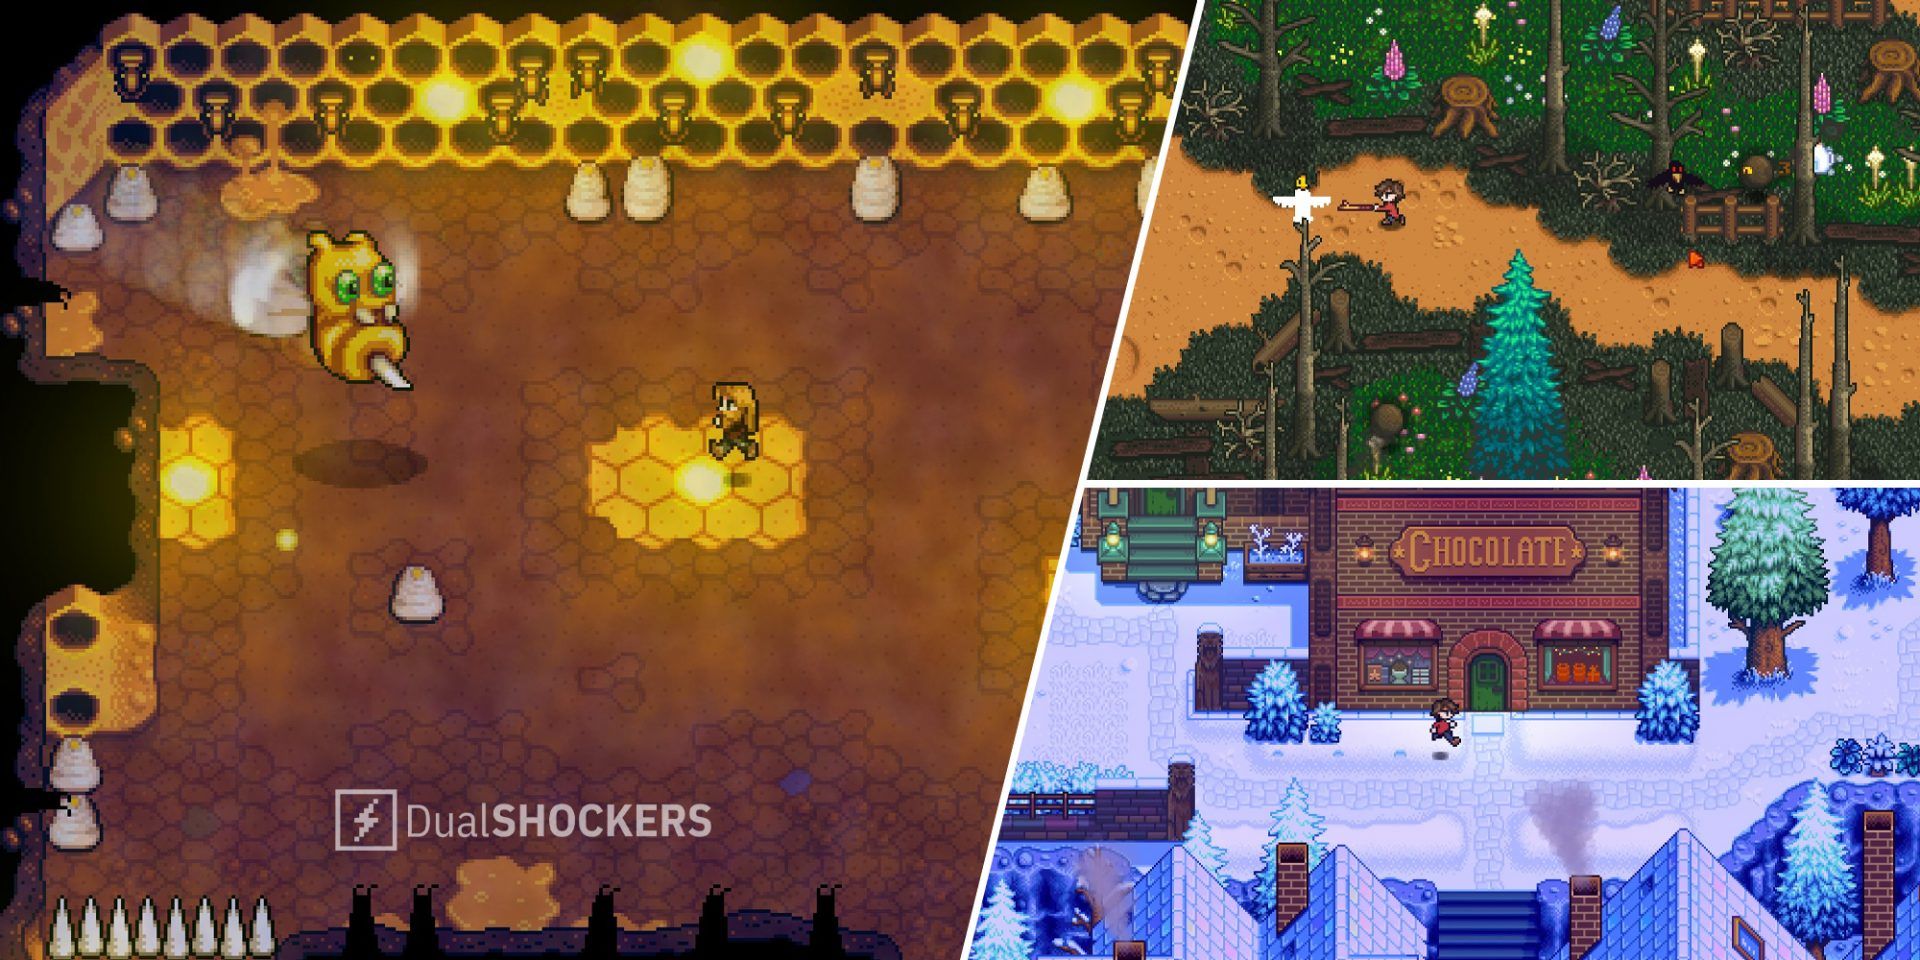 Haunted Chocolatier bee boss on left, player in forest on top right, player in snow in front of chocolate shop on bottom right